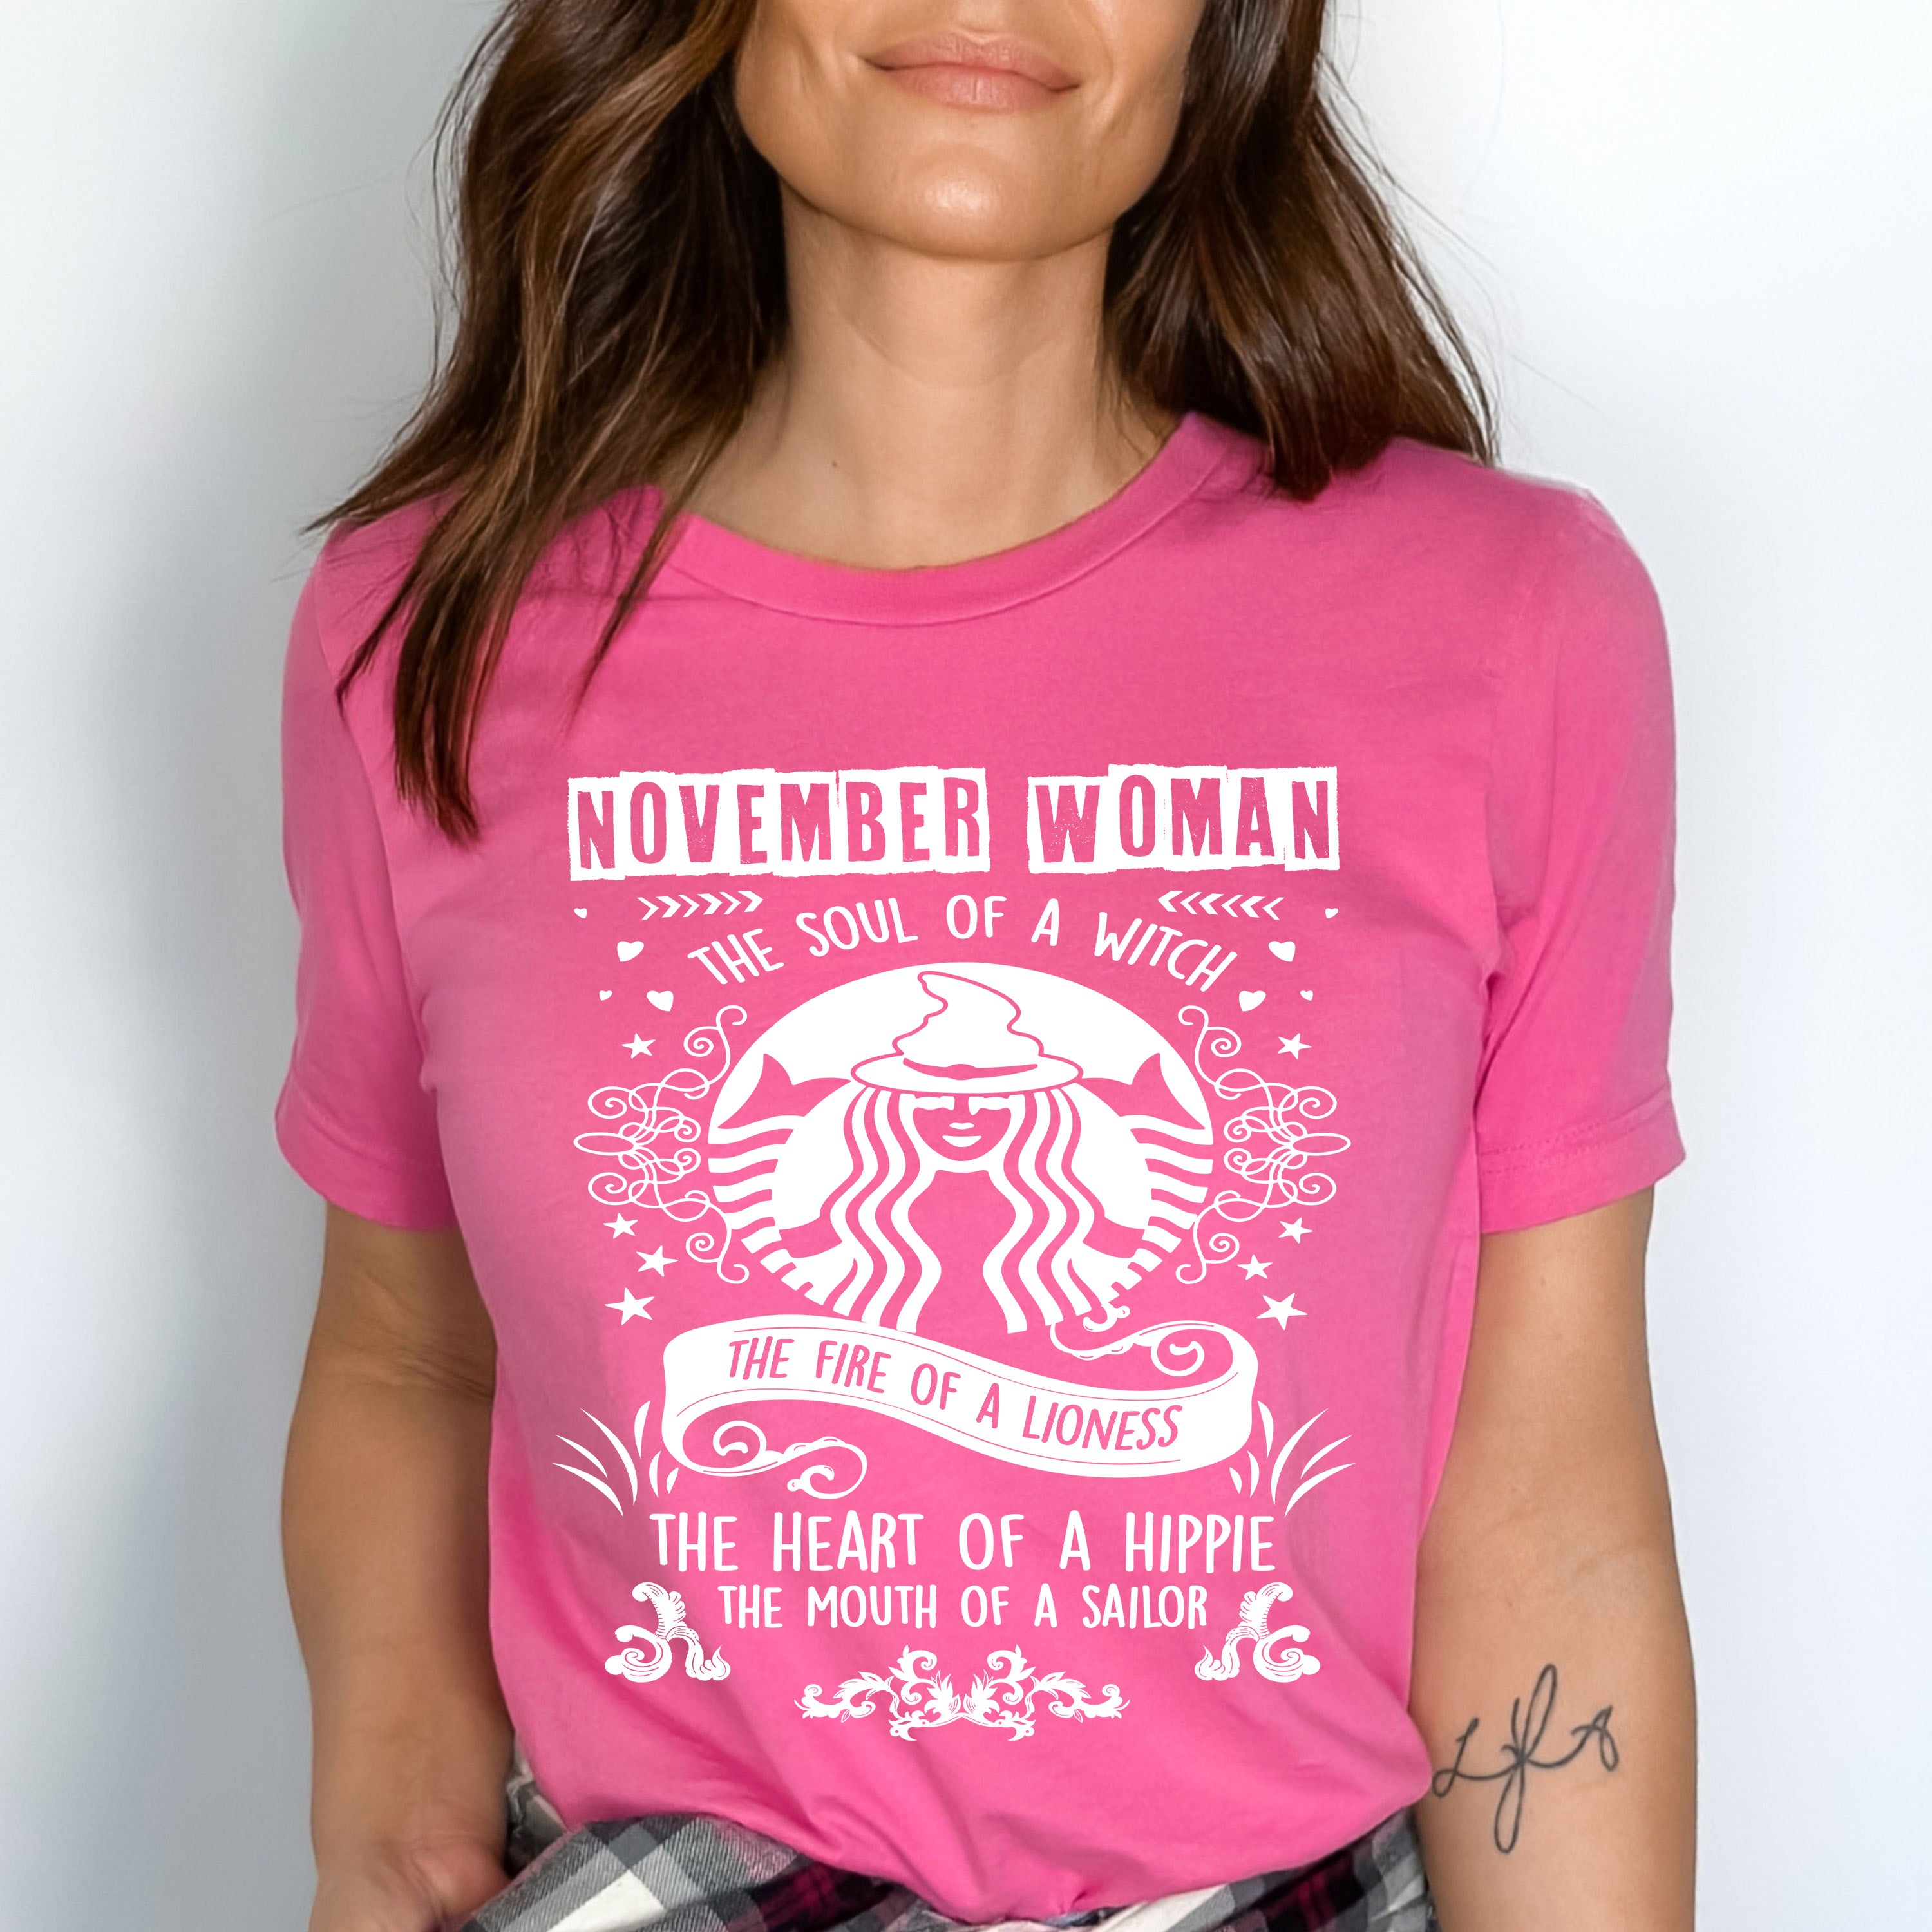 "NOVEMBER WOMAN The Soul Of A Witch The Fire Of A Lioness The Heart Of A Hippie...",T-Shirt.